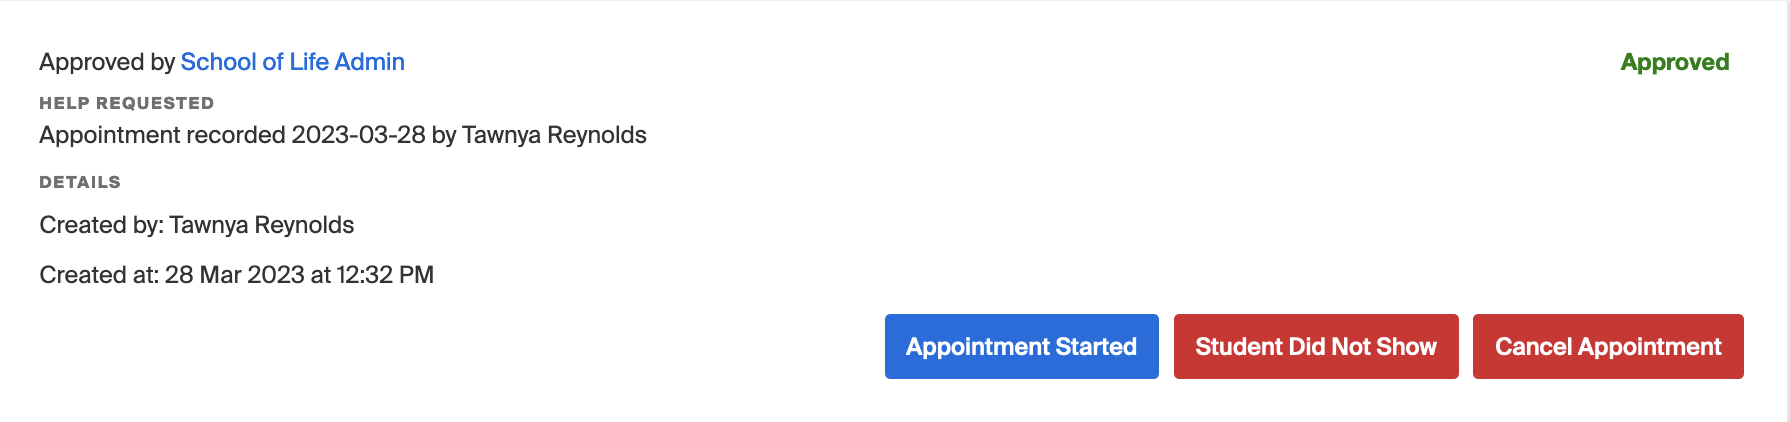 Appointment_Status.png